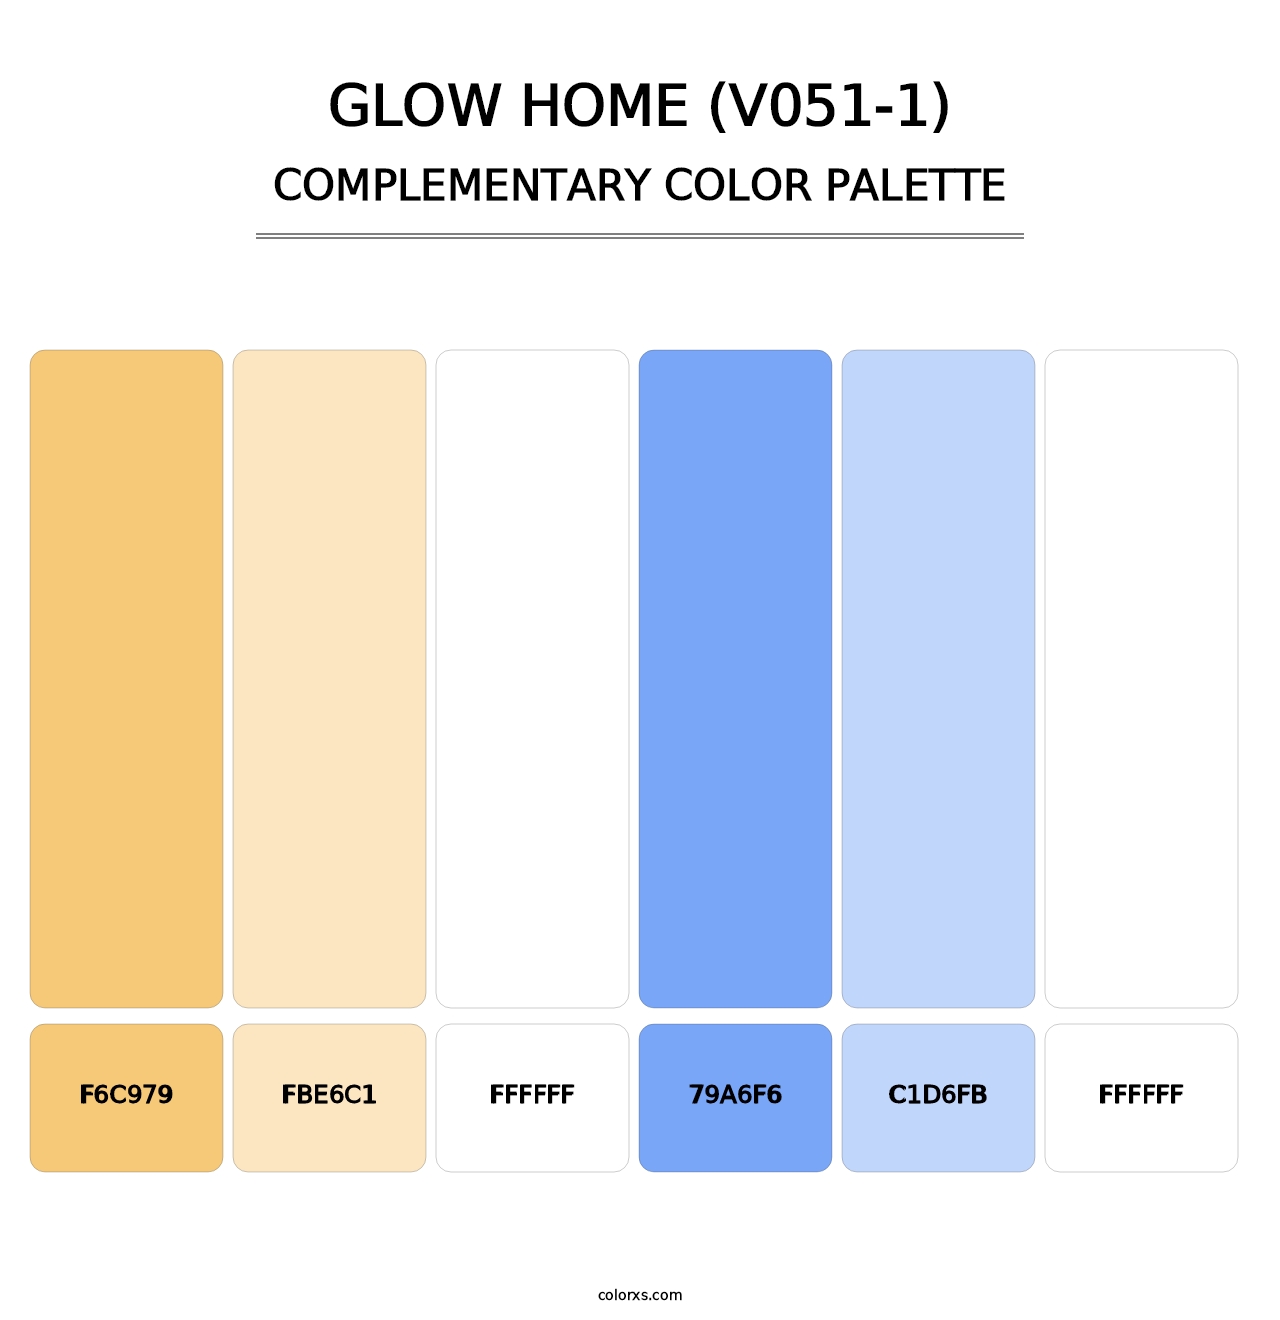 Glow Home (V051-1) - Complementary Color Palette